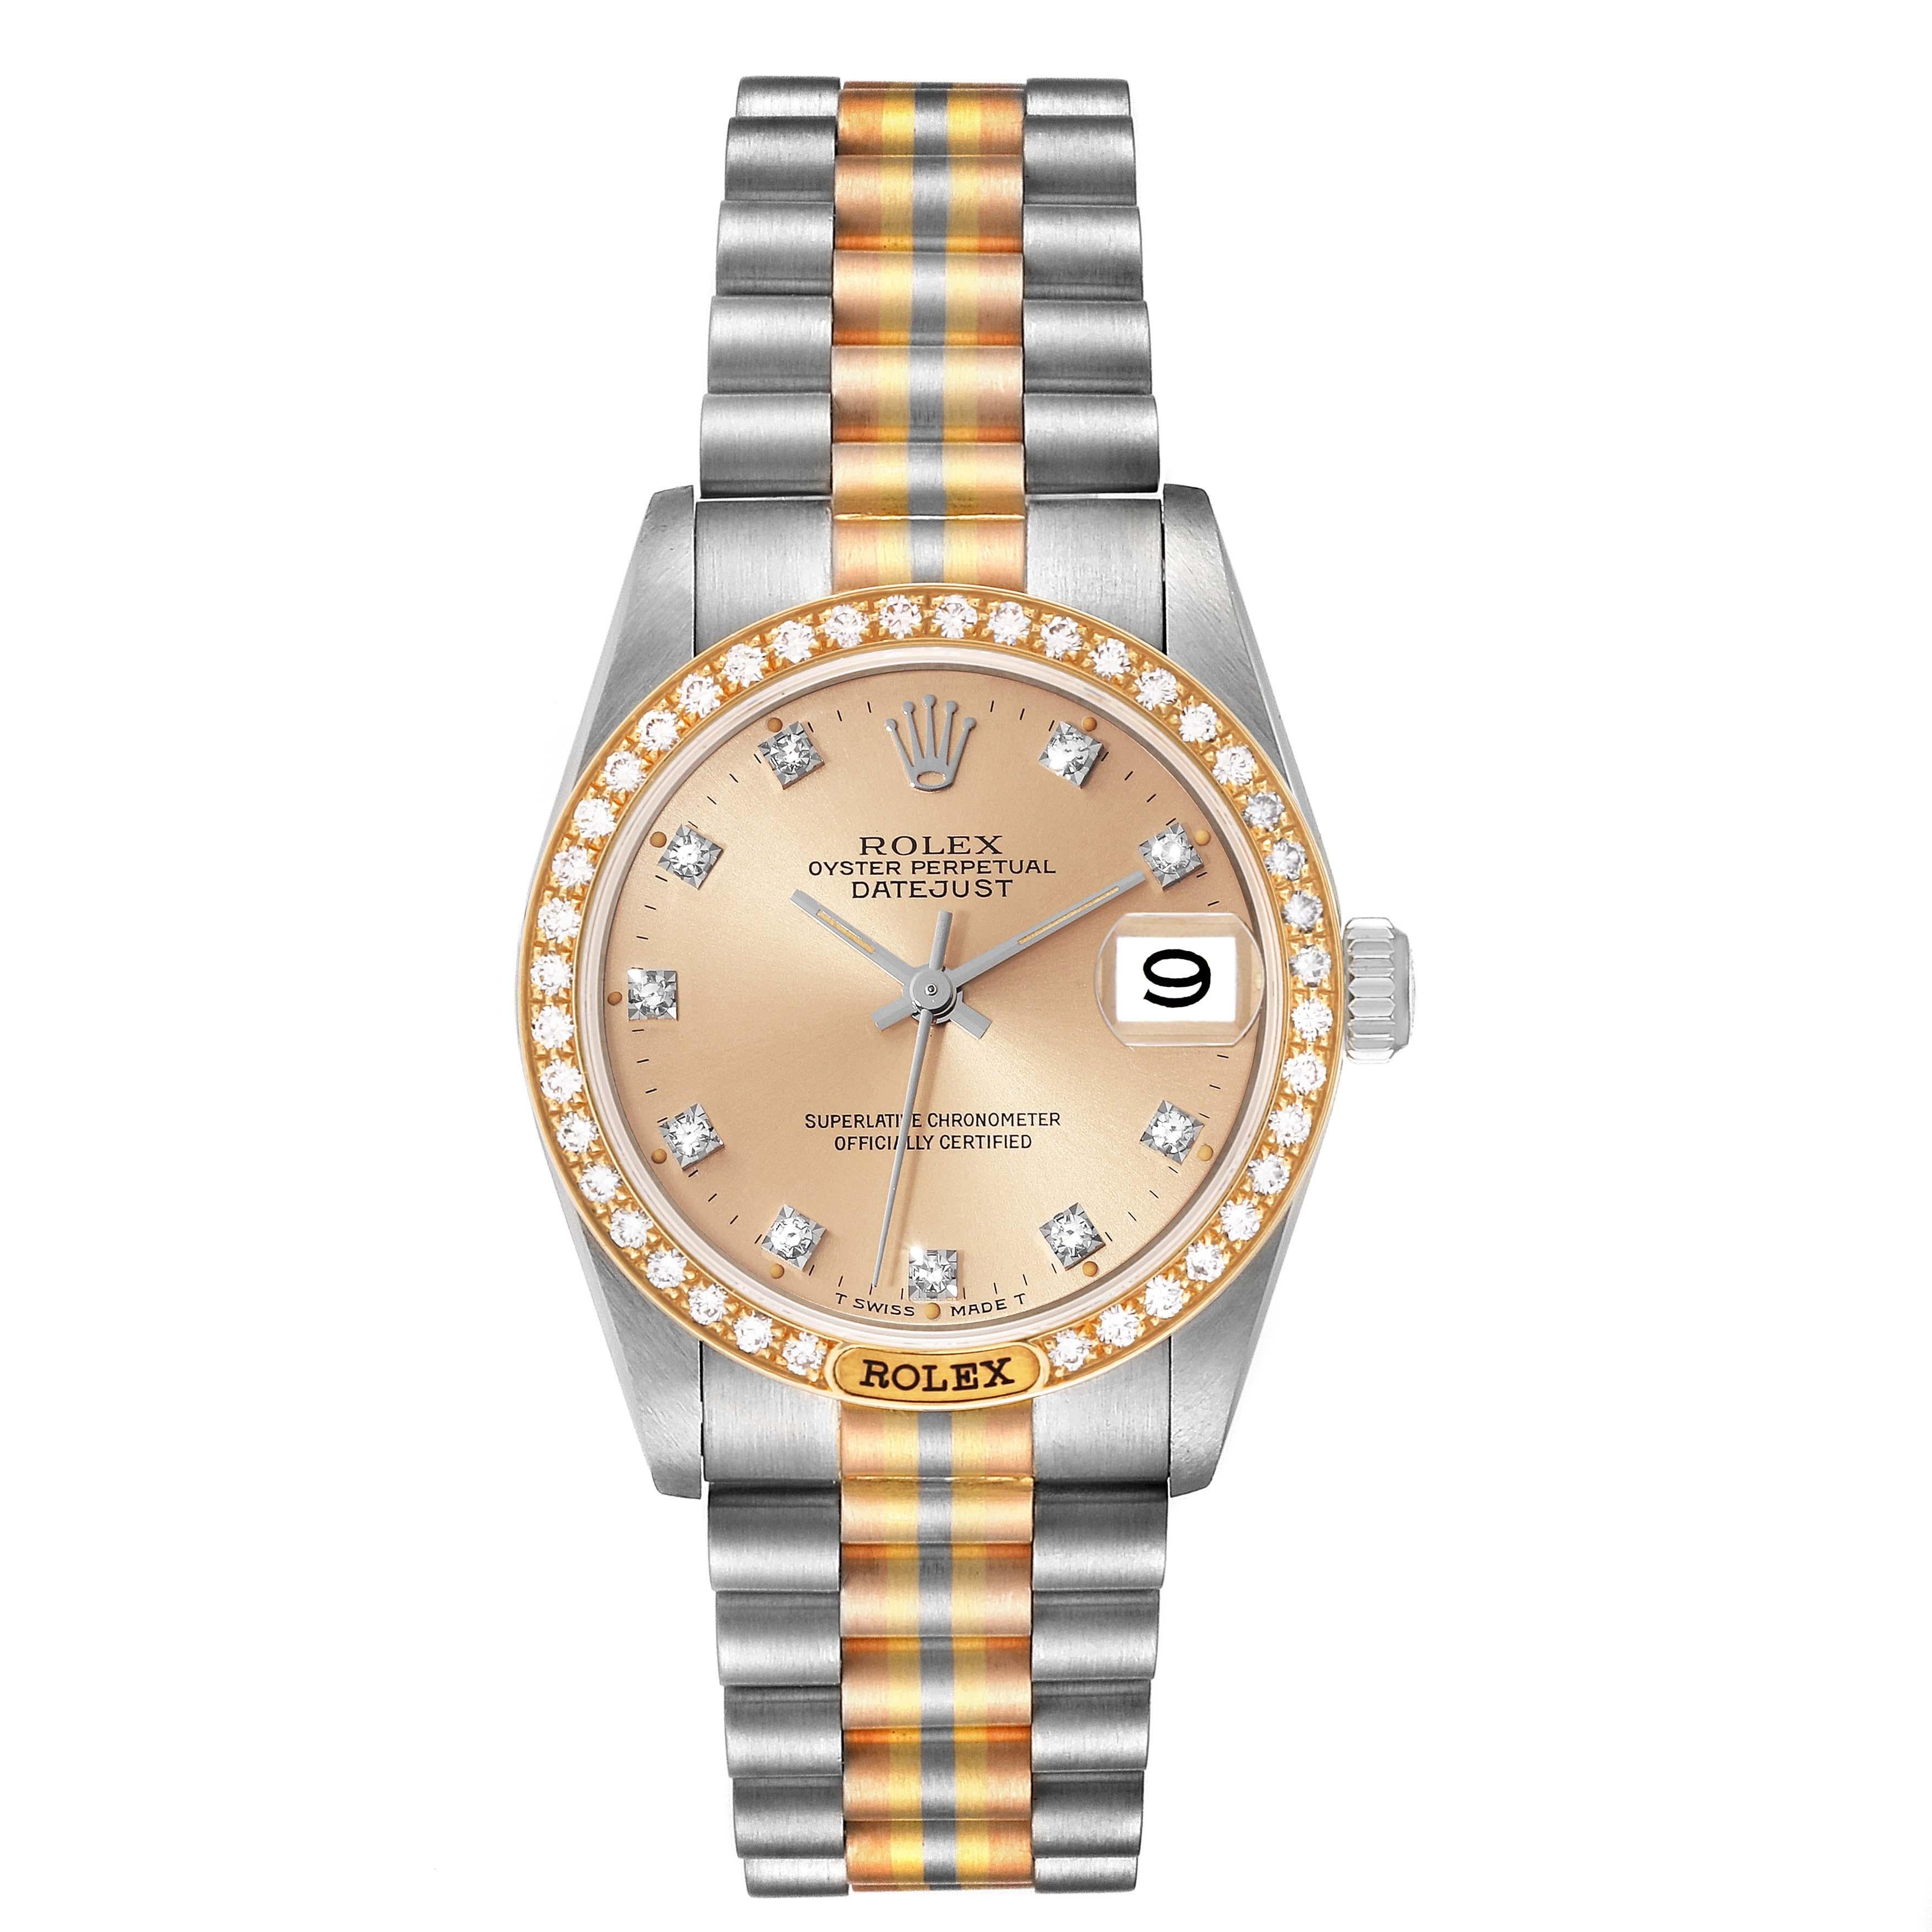 Rolex President Tridor Midsize White Yellow Rose Gold Diamond Ladies Watch 68149. Officially certified chronometer self-winding movement. 18k white gold oyster case 31.0 mm in diameter. Rolex logo on a crown. Original Rolex factory 18k yellow gold